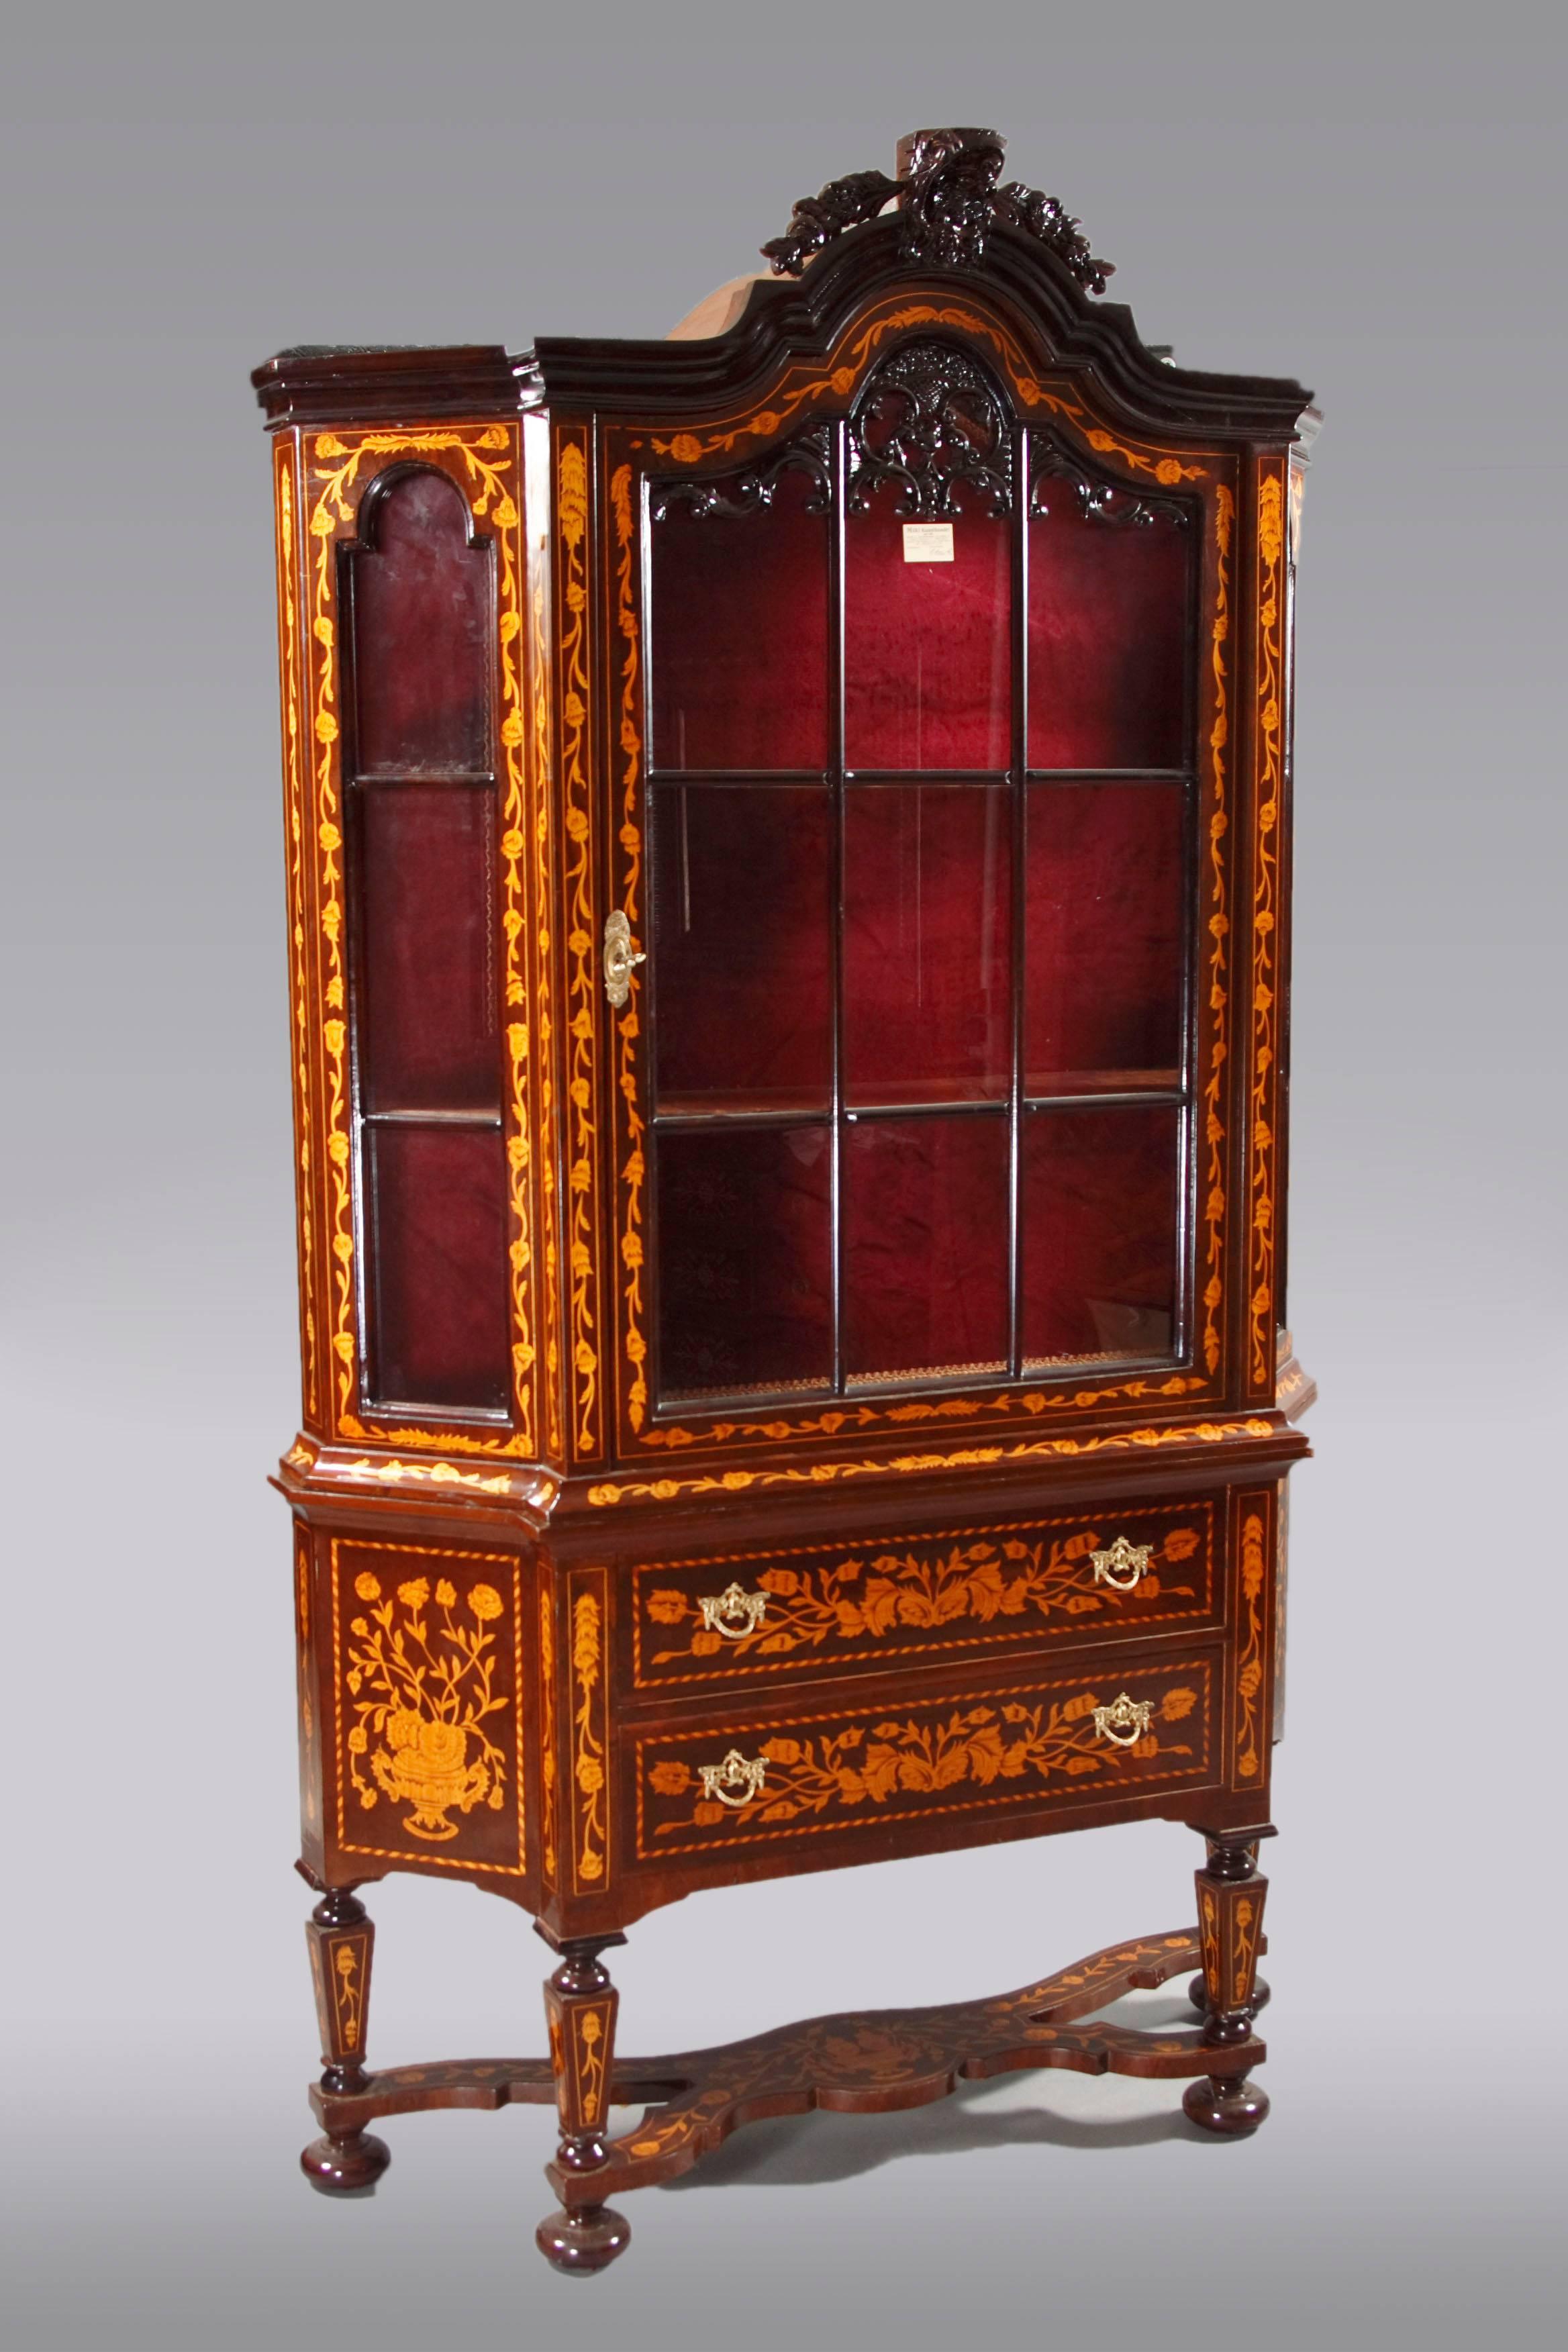 20th Century, Vitrine with Fine Inlay in the Dutch Baroque Style Mahogany Veneer In Good Condition For Sale In Berlin, DE